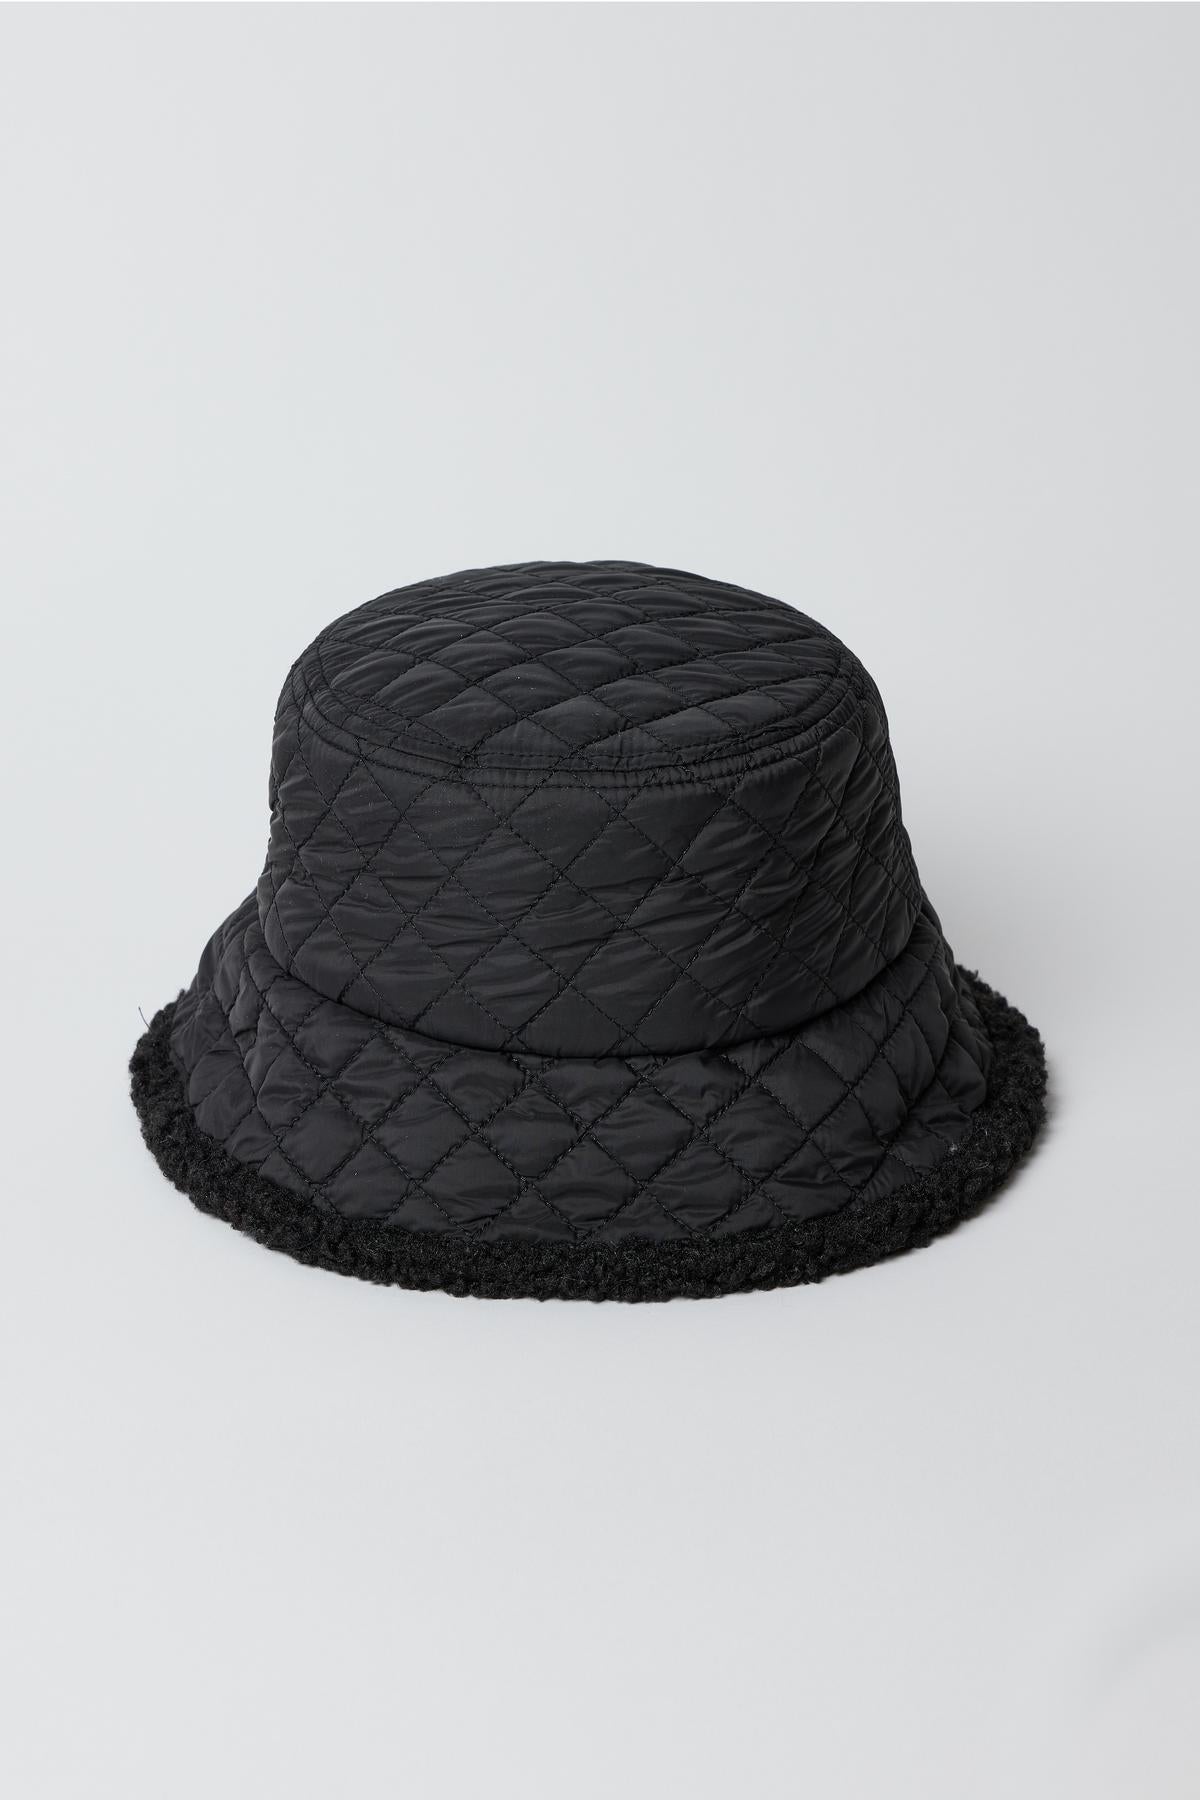 Quilted Bucket Hat in black-26749513564353